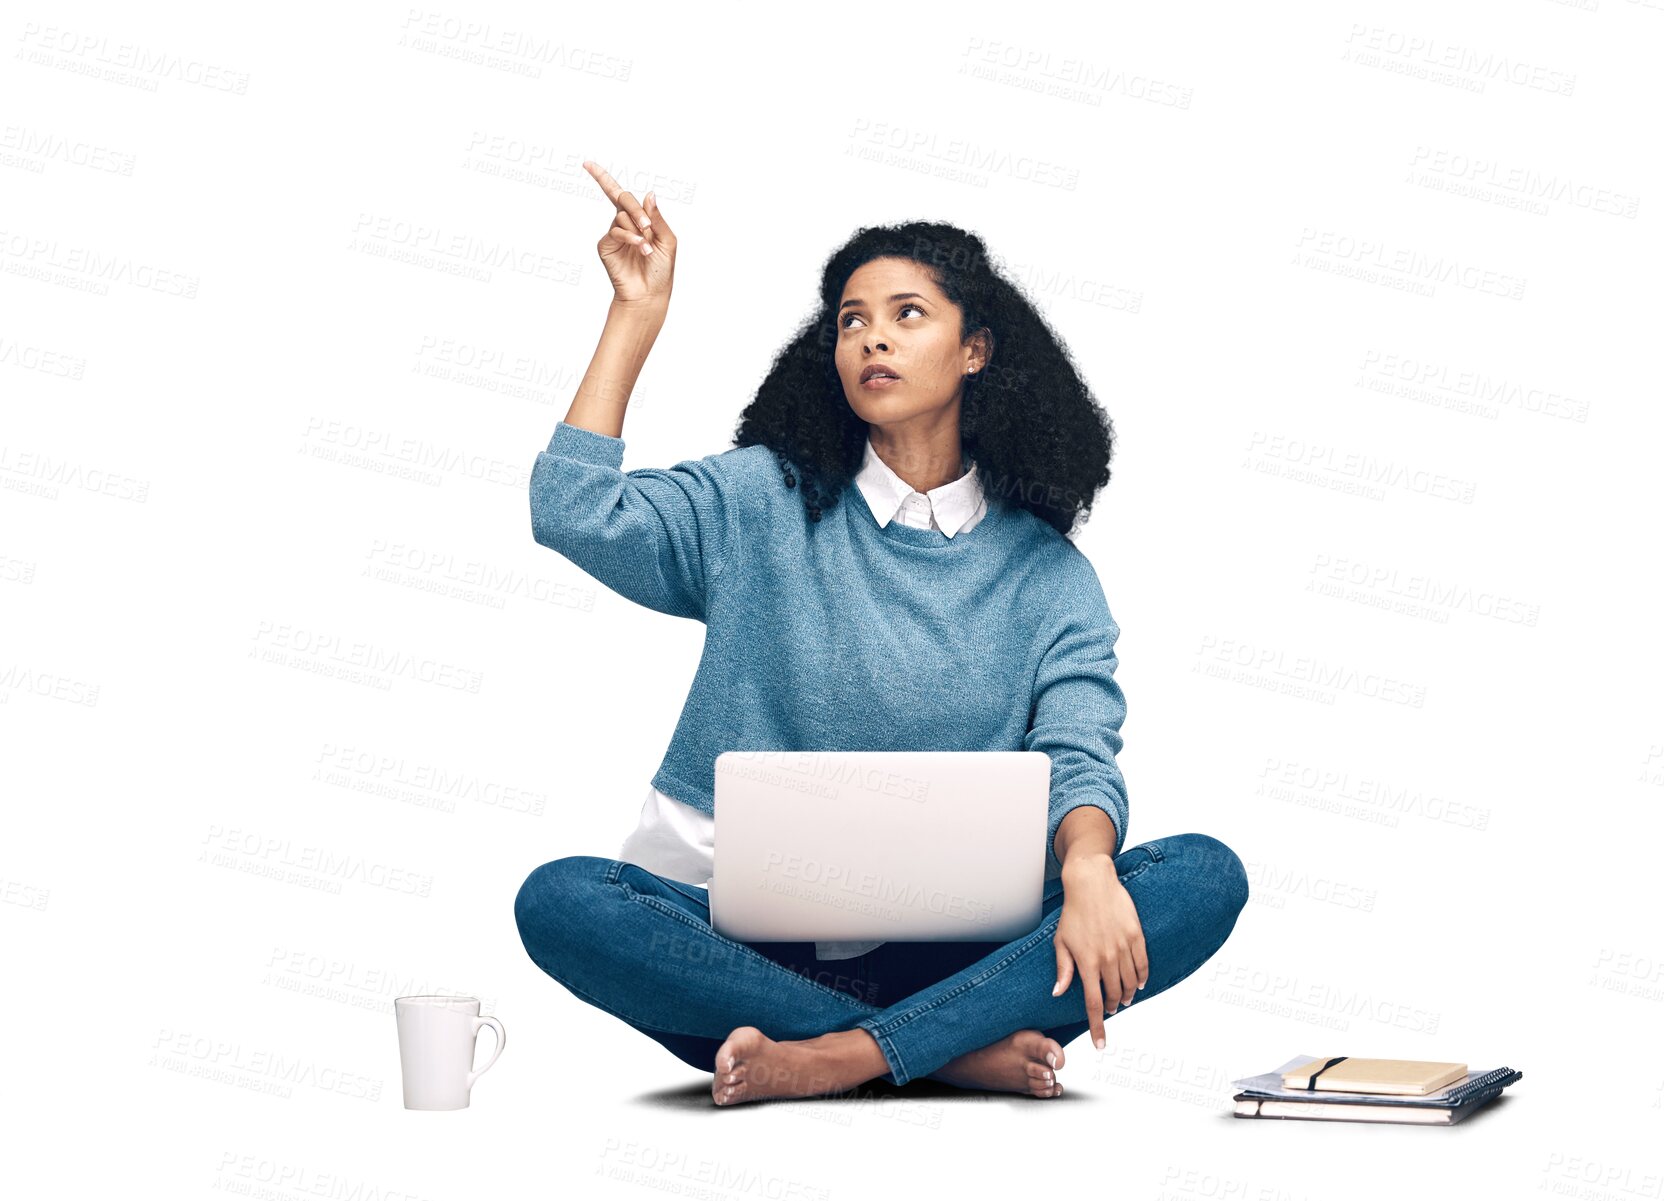 Buy stock photo Laptop, digital and pointing with woman on floor with notebooks and isolated on png background. Technology, online and website for job, research and internet for remote work and advertising idea